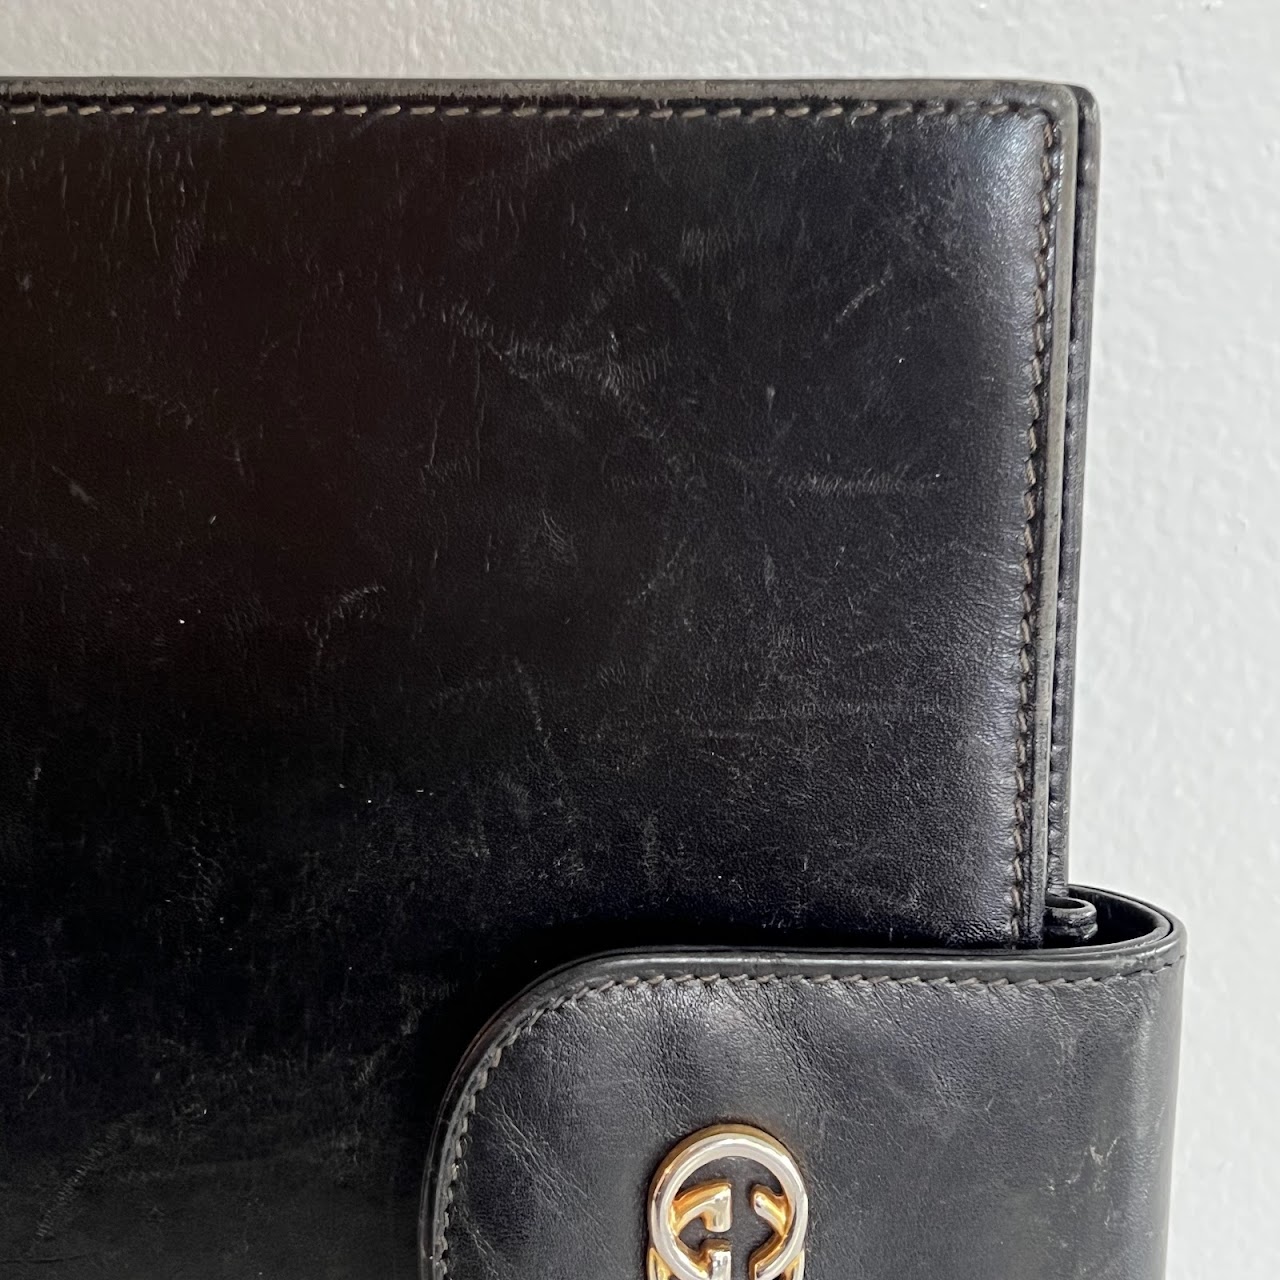 Gucci Vintage Leather Five-Ring Notebook Case